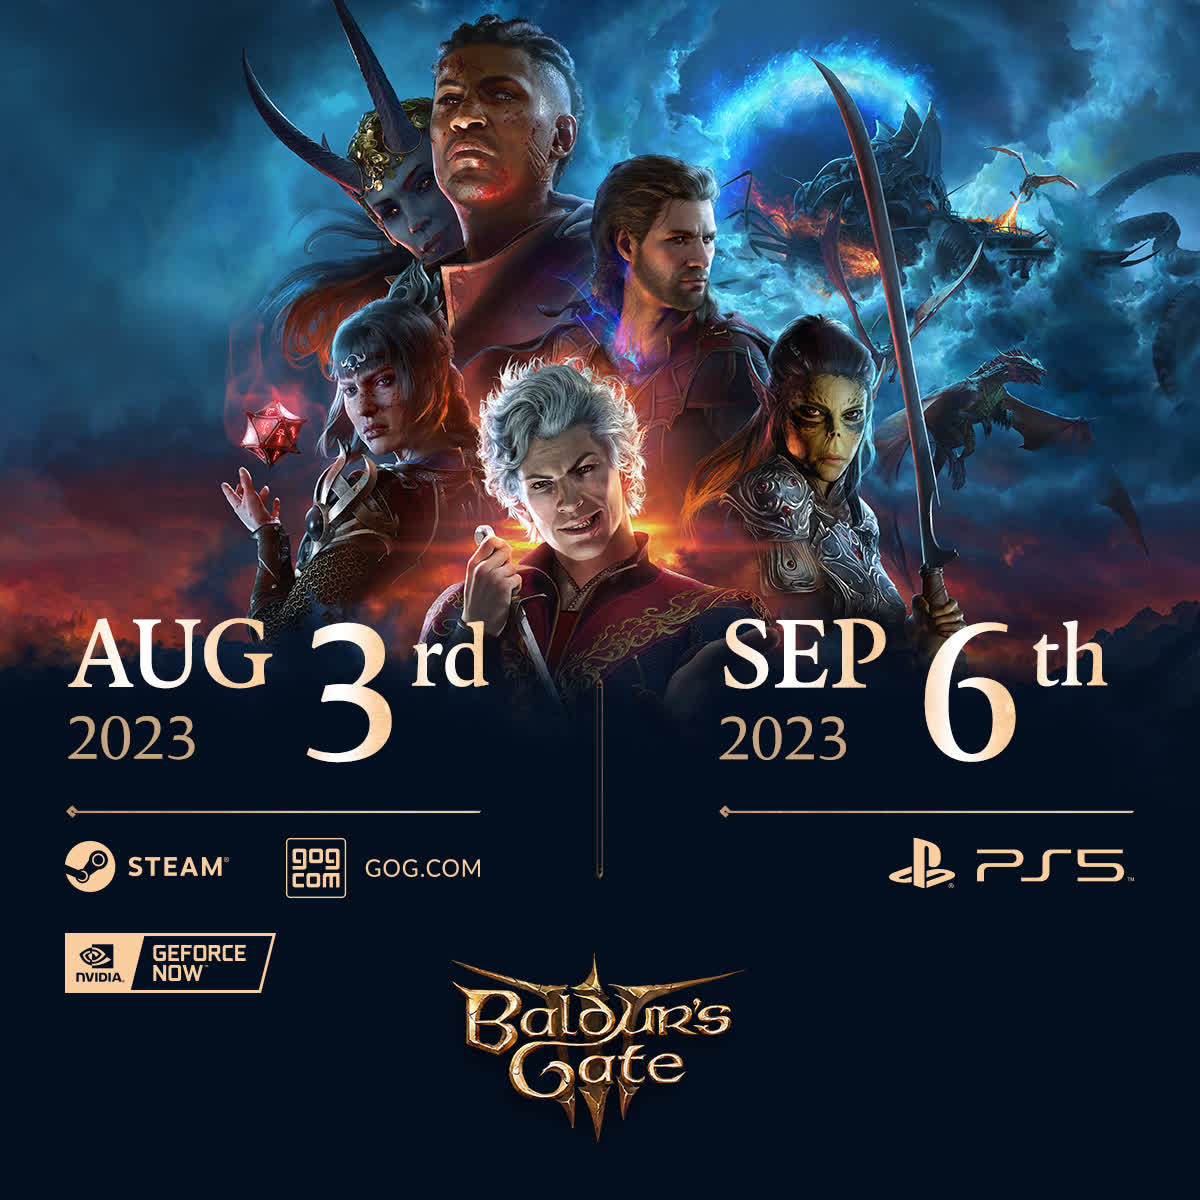 Baldur's Gate 3 release date pushed forward to August 3 on PC, pushed back to September 6 on PS5